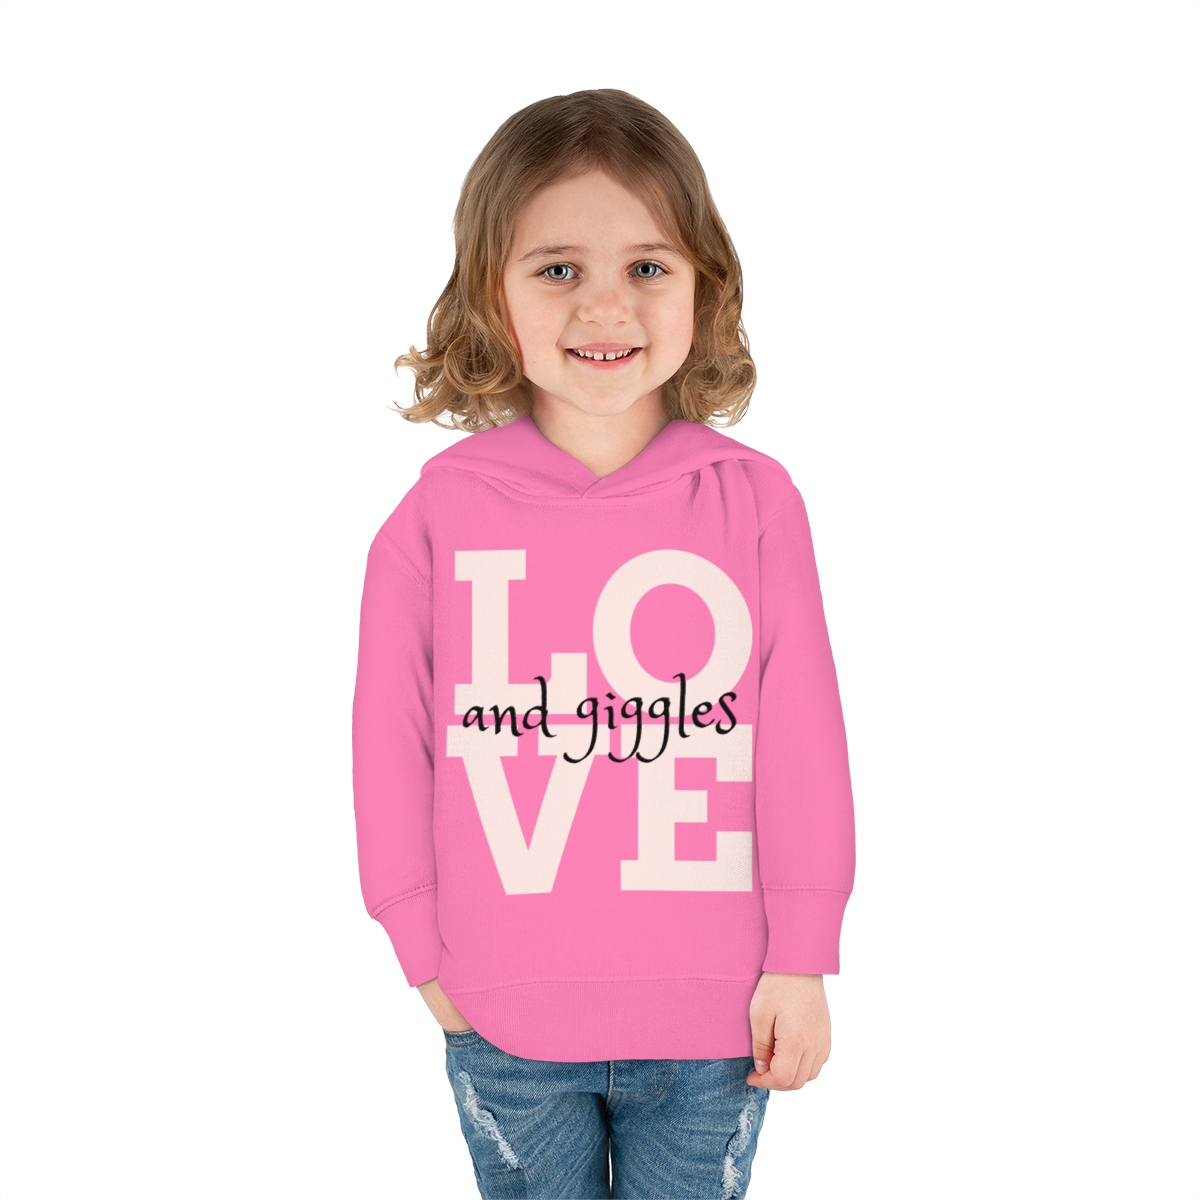 Kids' Clothing and Accessories